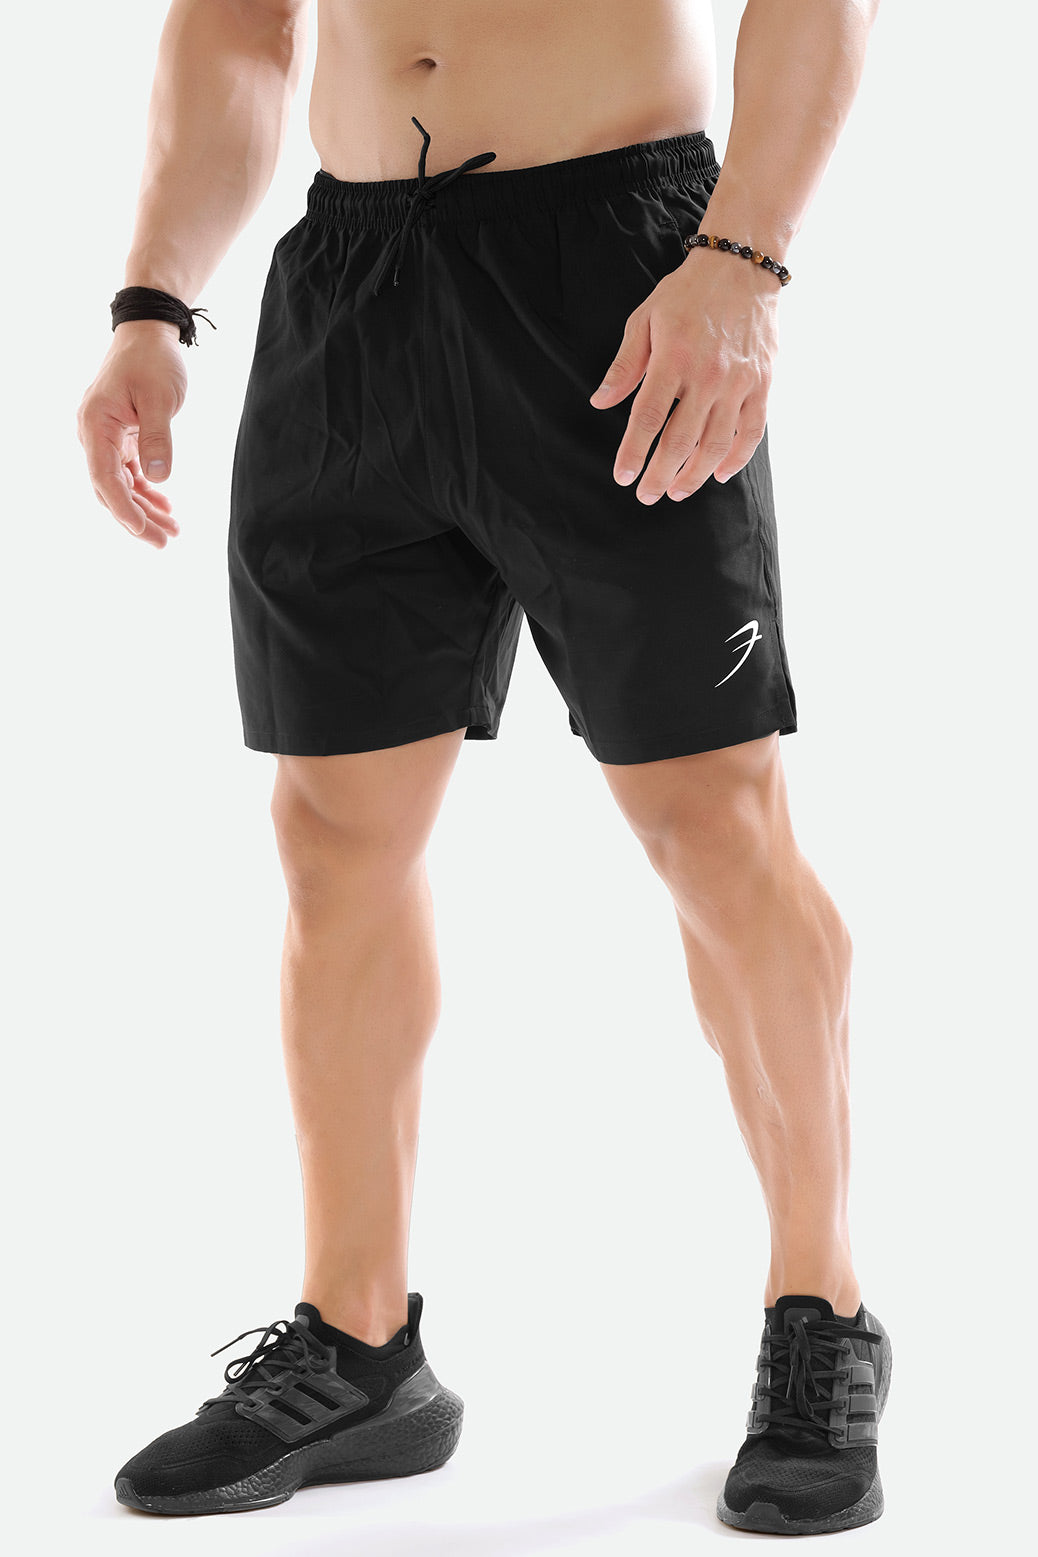 Buy mens shorts for gym & running in cotton black white online – FUAARK